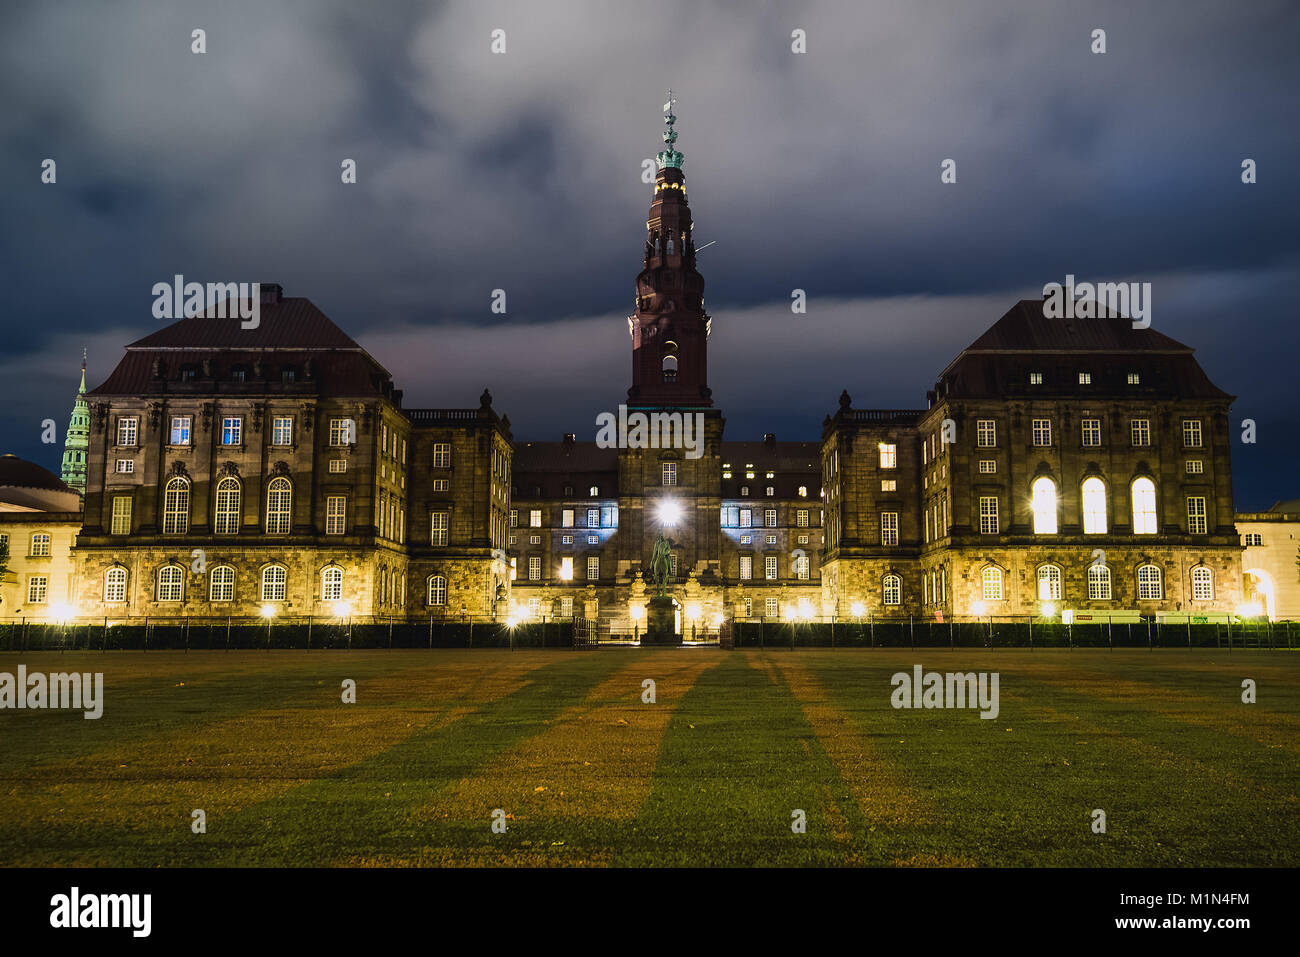 Christiansborg Palace in central Copenhagen at night. Cristiansborg castle in Denmark. Night lights and shadows wide angle view. Stock Photo